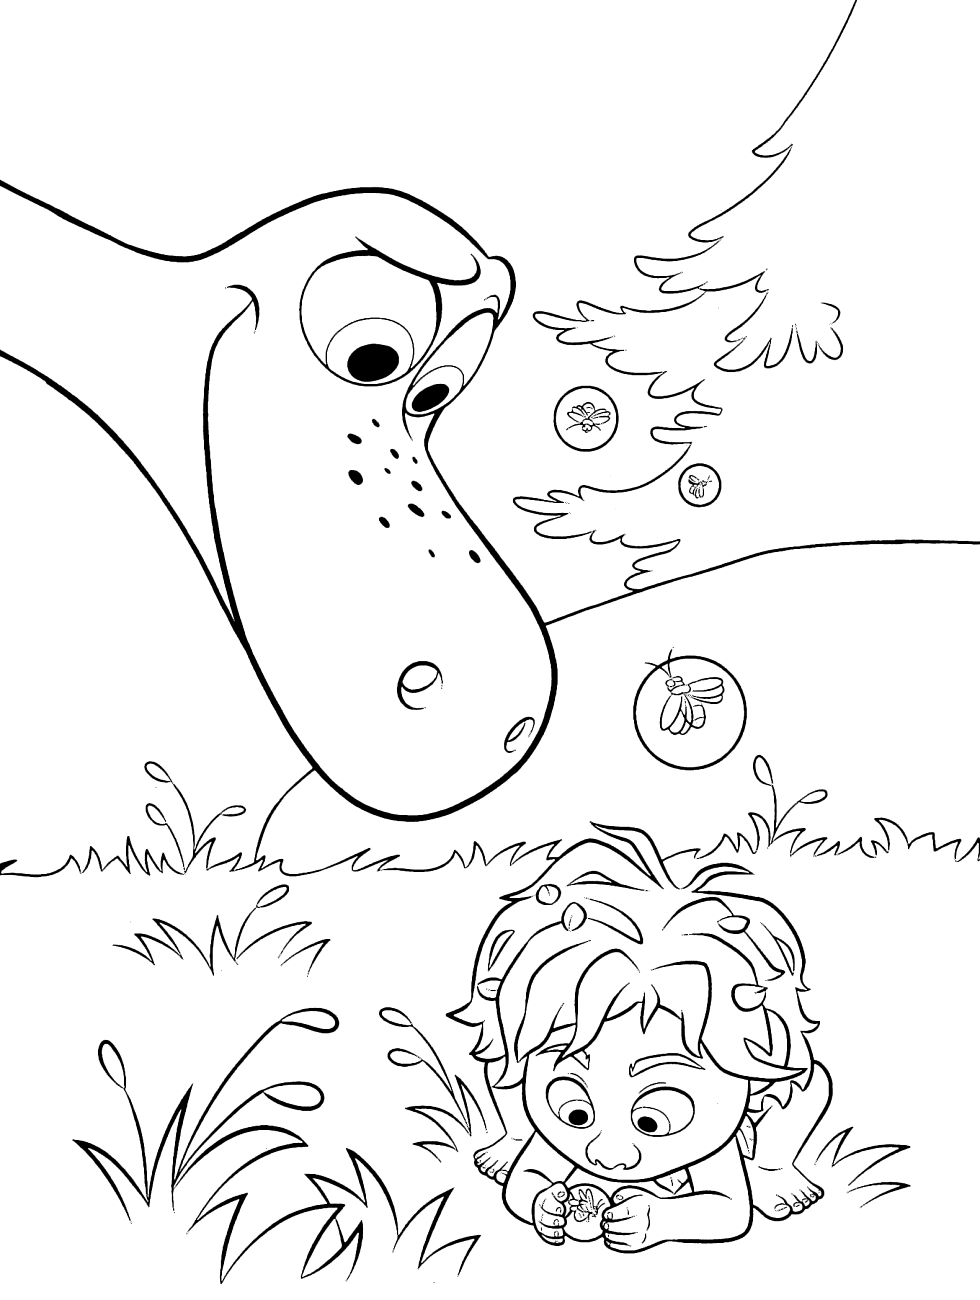 Arlo with Spot looking the fireflies Coloring Page